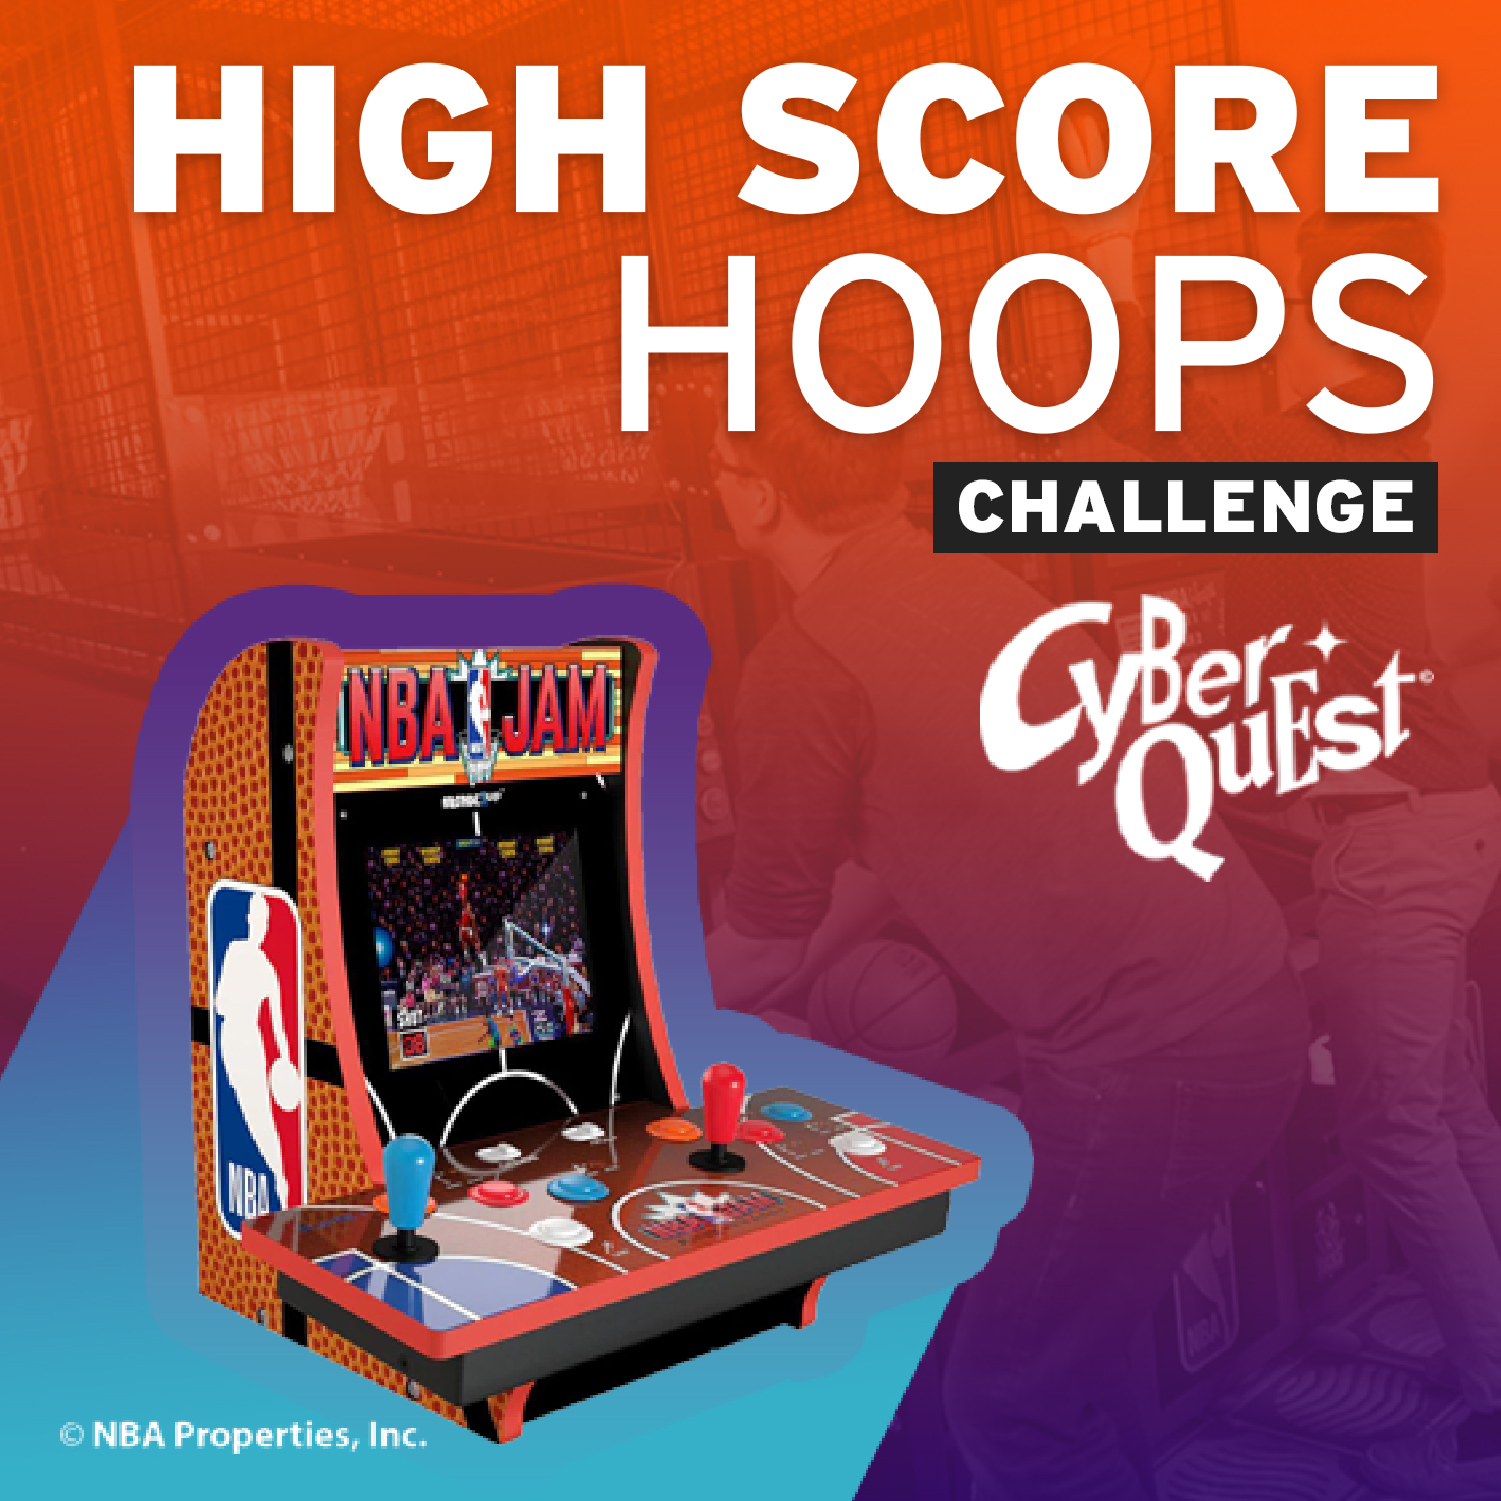 High Score Hoops Challenge at Cyber Quest